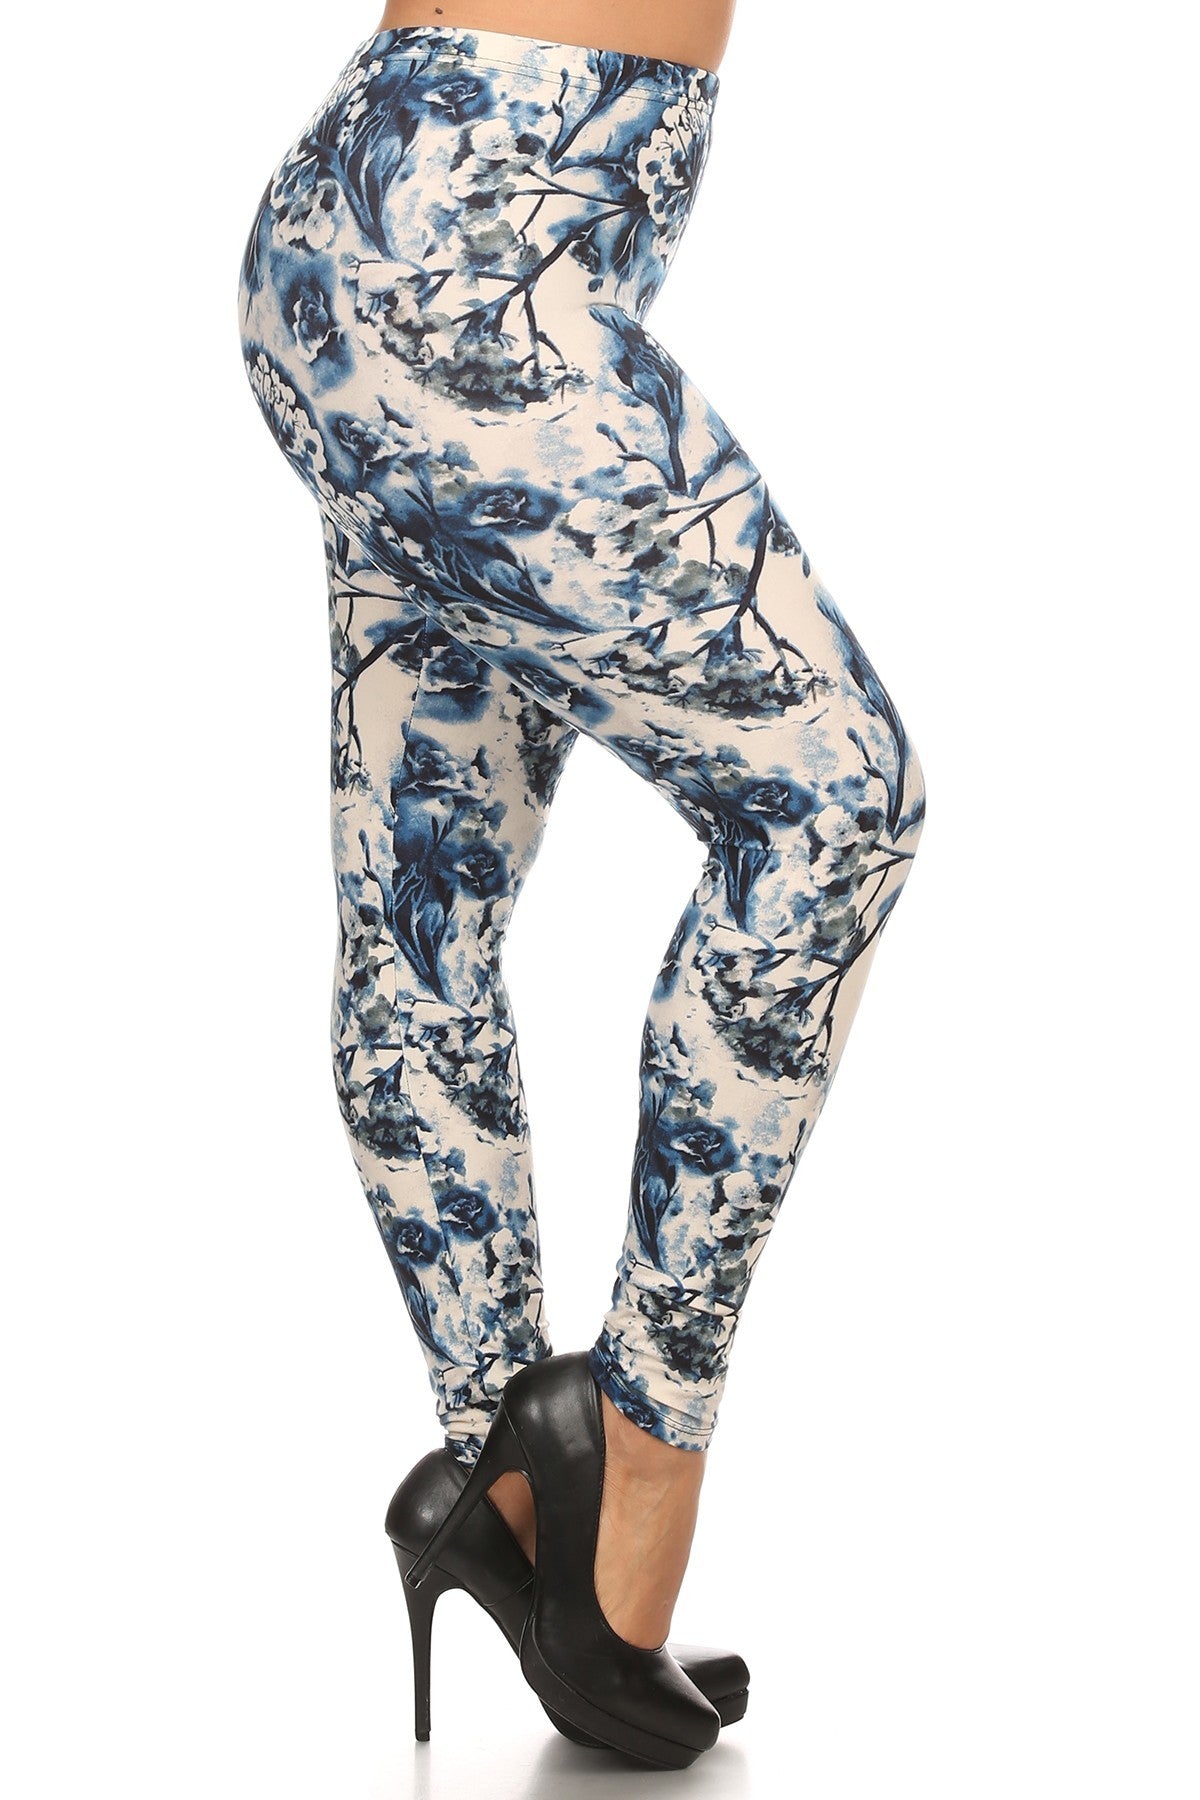 Plus Size Floral Print, Full Length Leggings In A Slim Fitting Style With A Banded High Waist - Love It Clothing